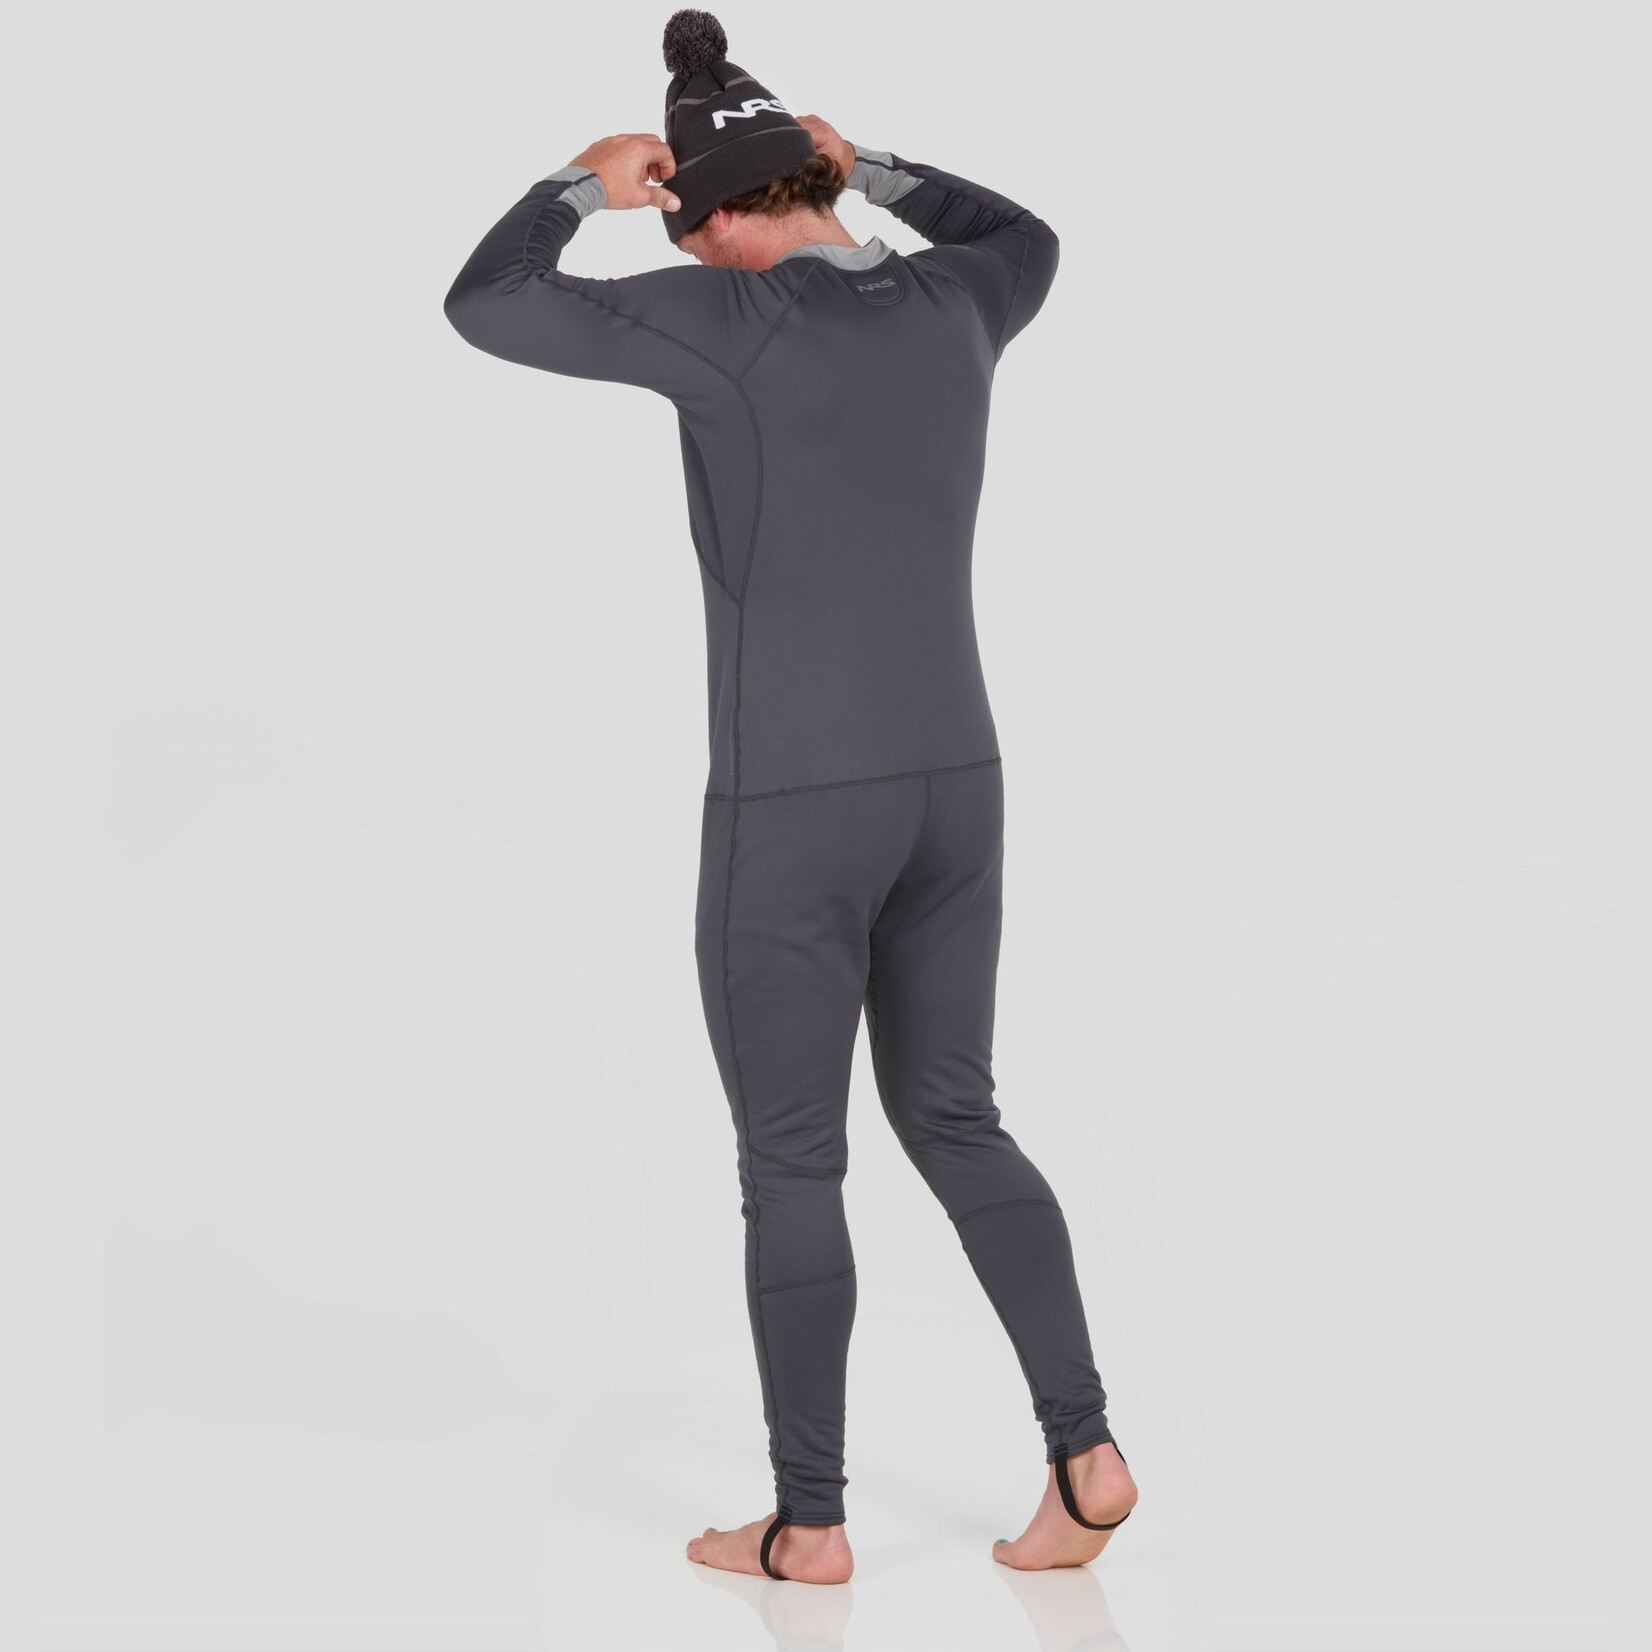 NRS - Men's Expedition Weight Union Suit